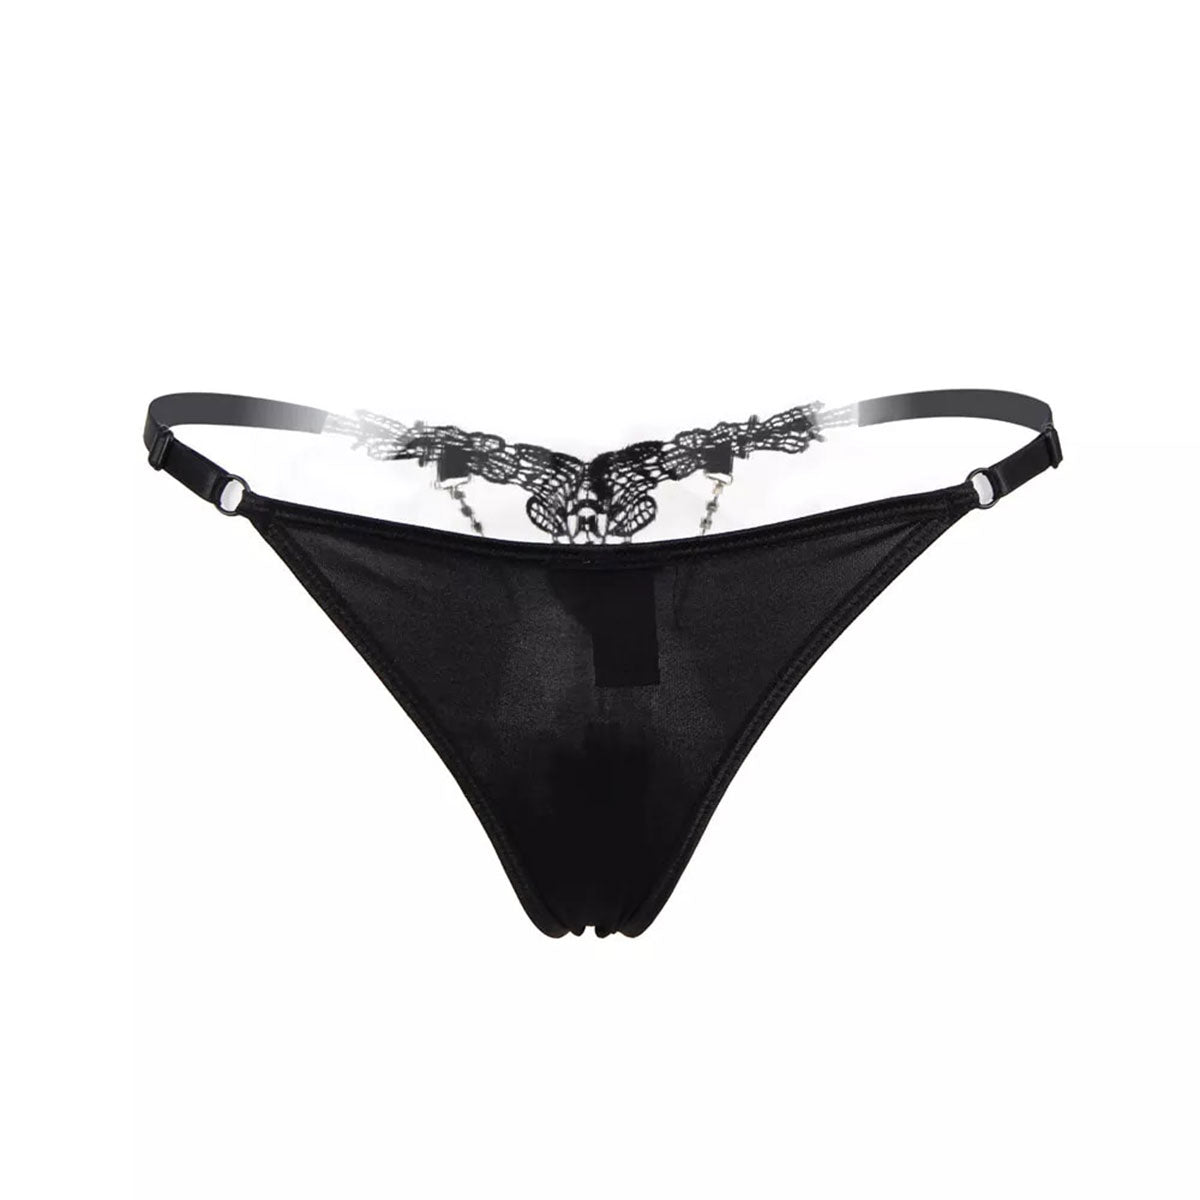 Sexy G-string Panty, Lace Adjustable Thong Lingerie – Wonder Skull